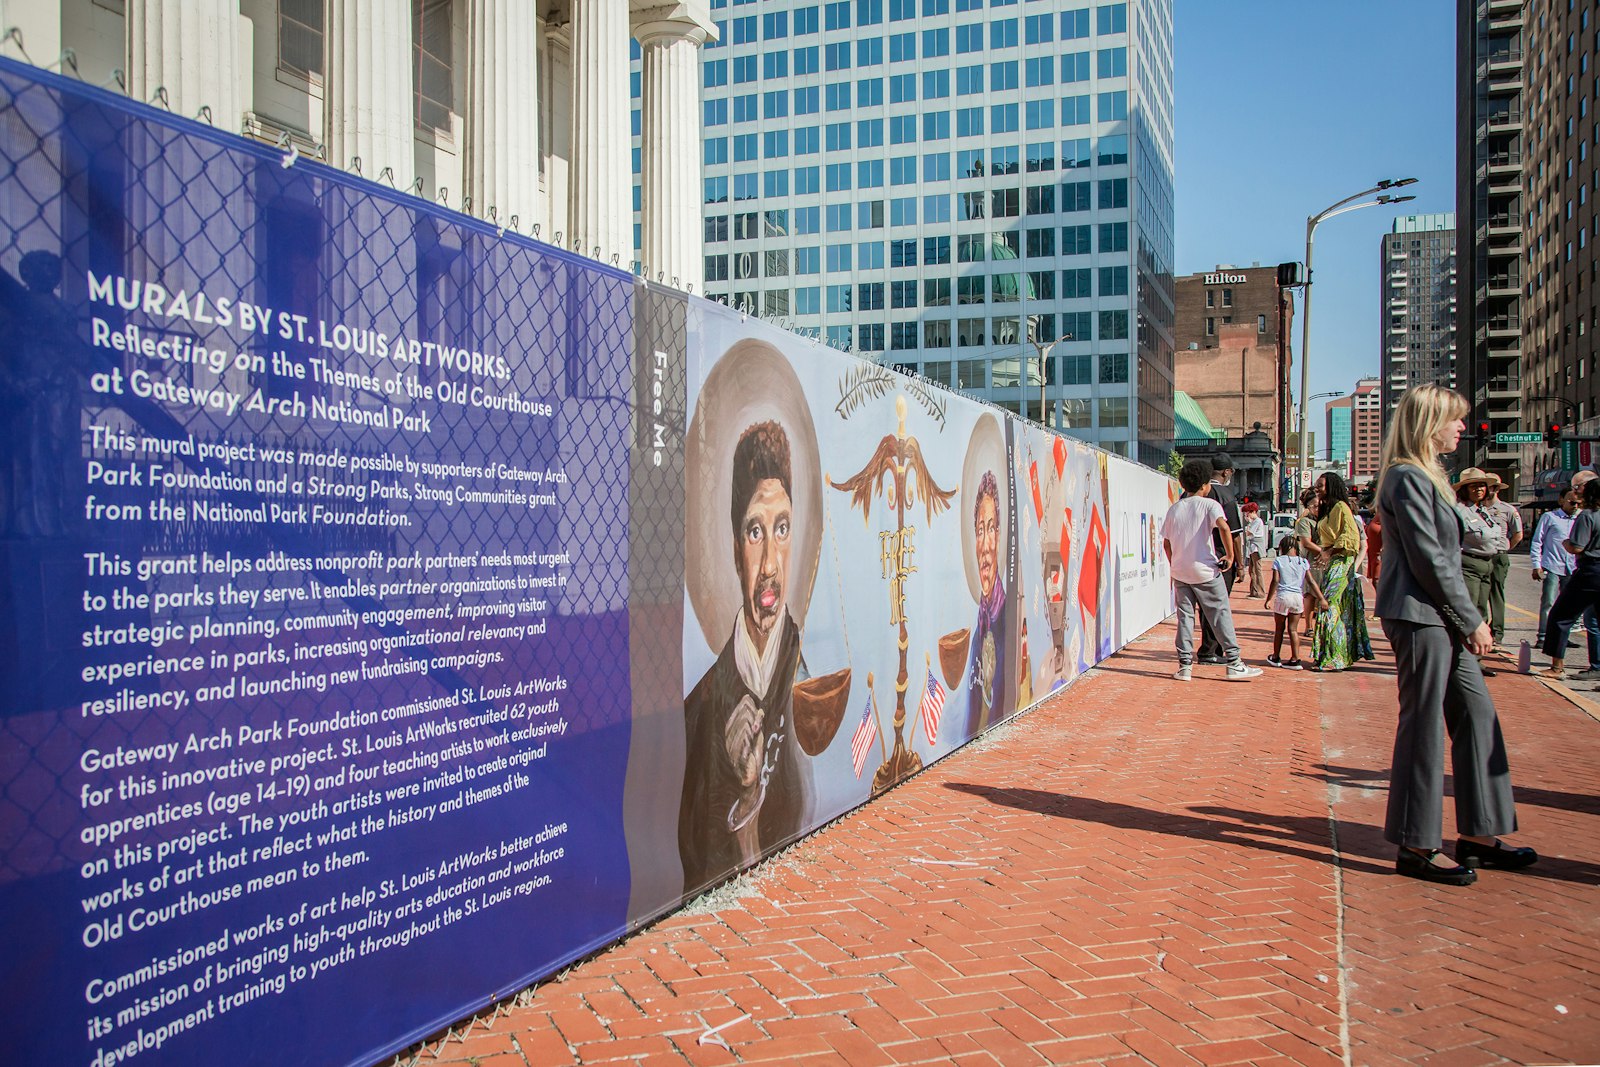 People stand and talk on a red brick sidewalk. On a fence surrounding an old courthouse is a color-printed screen with art and a long blurb of text